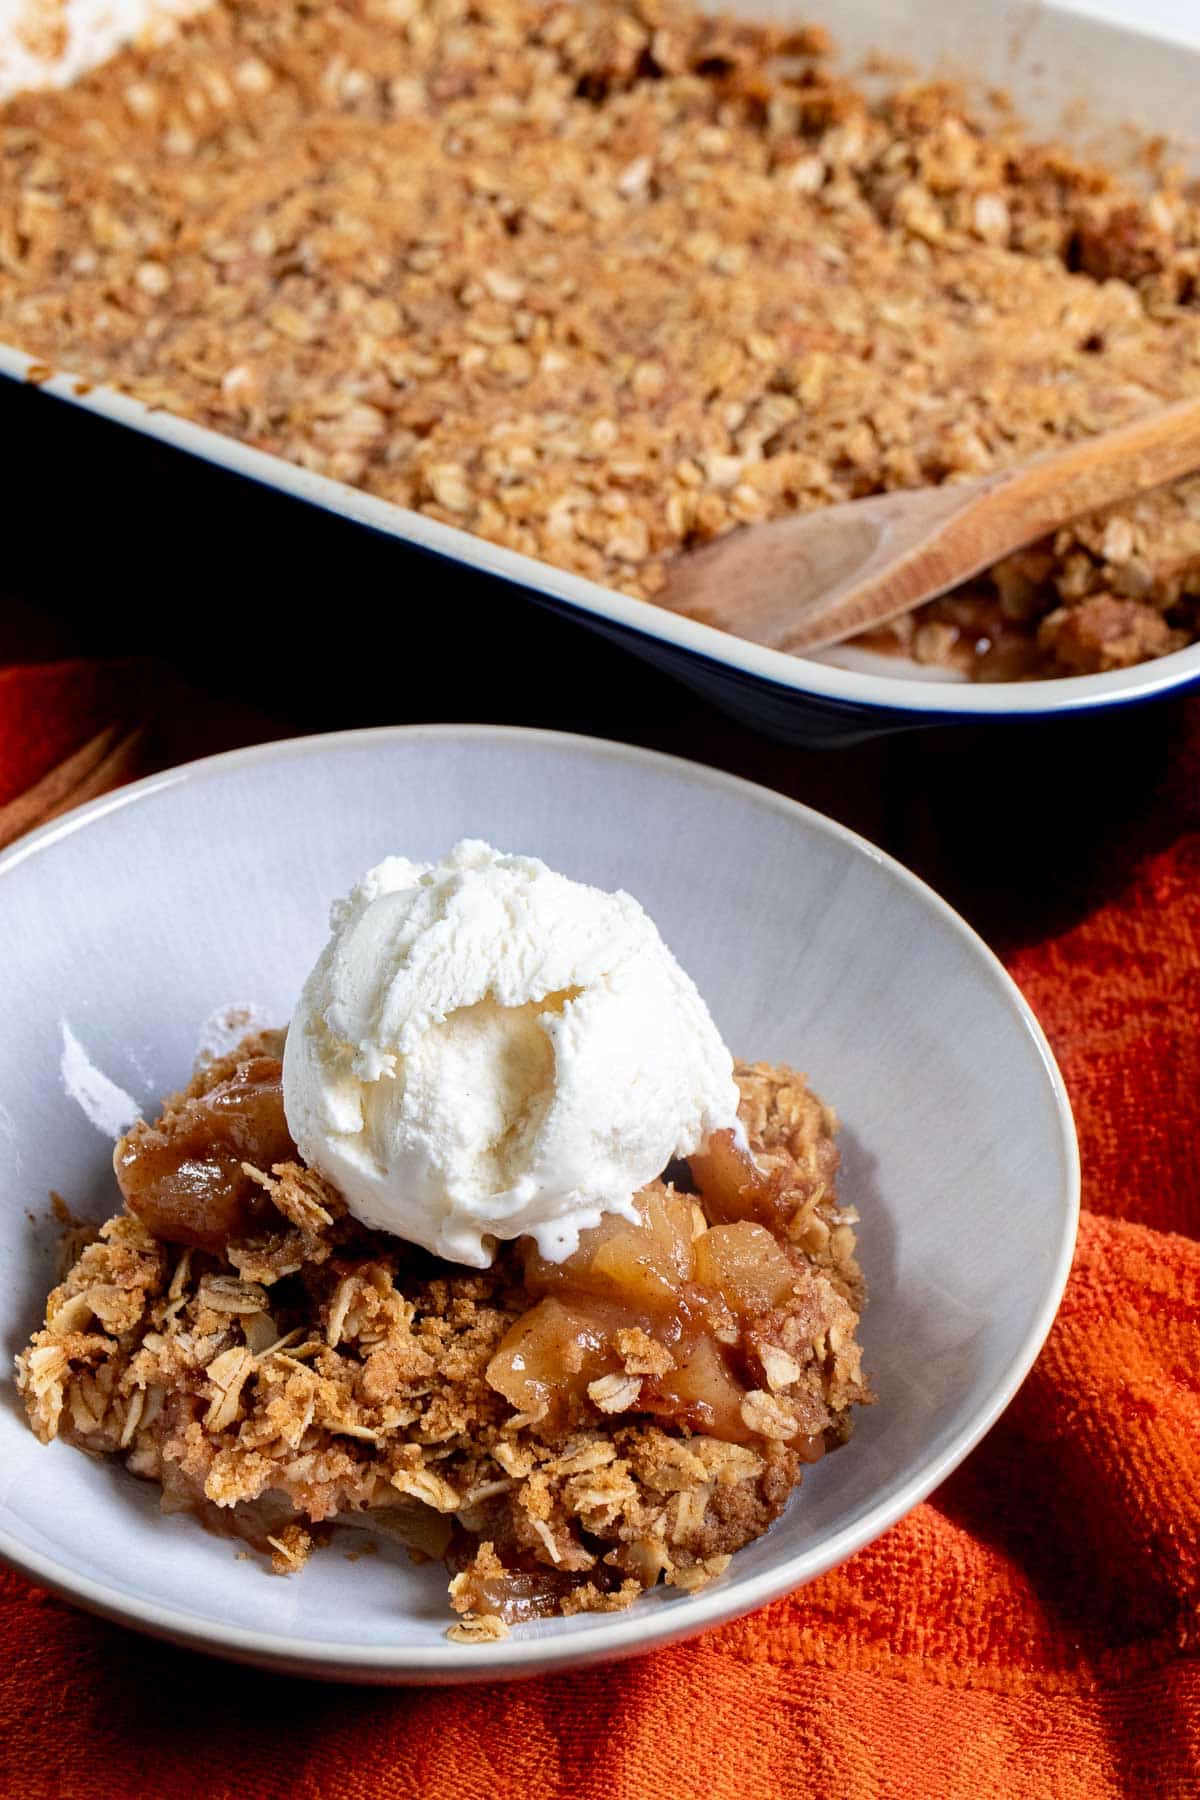 Angled view of an apple crisp in a 13x9 dish with a portion in a white bowl next to it, topped with ice cream.